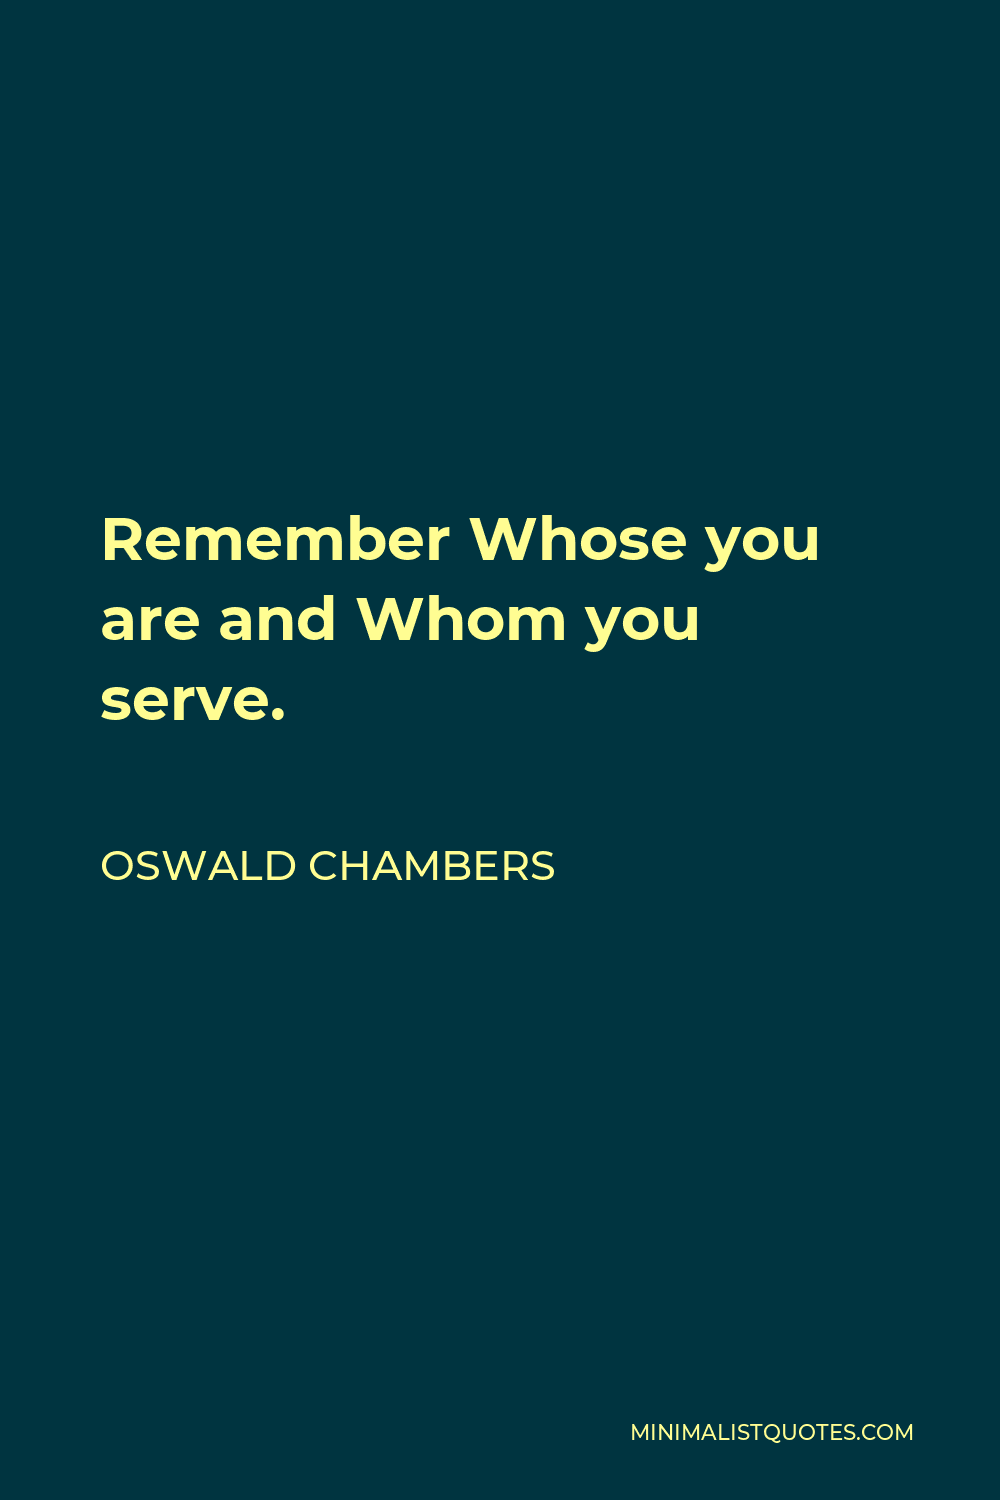 Oswald Chambers Quote - Remember Whose you are and Whom you serve.